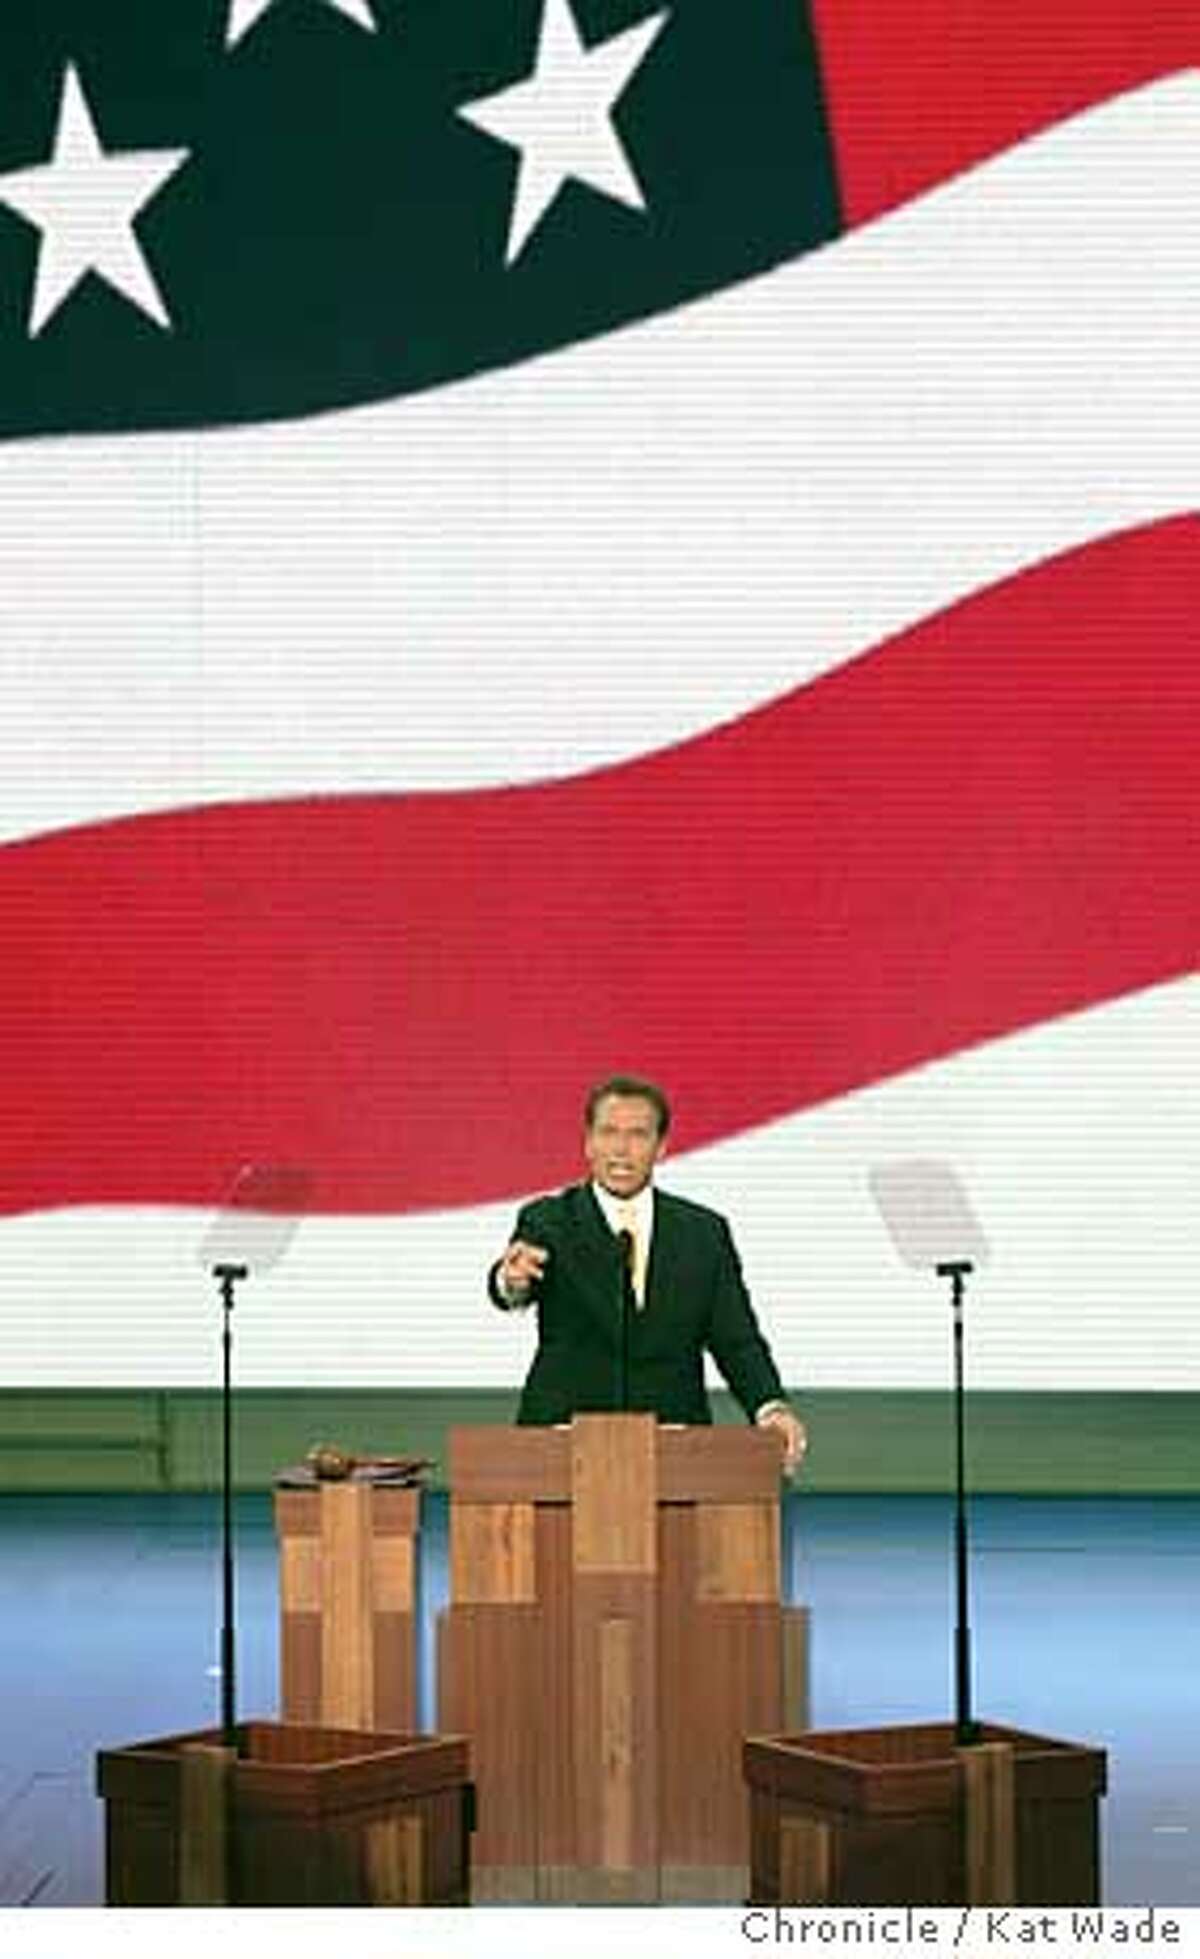 On 8/31/04 in New York, California Govener Arnold Schwarzenegger gives the key note speech during the second night of the Republican National Convention in New York. The Chronicle/ Kat Wade